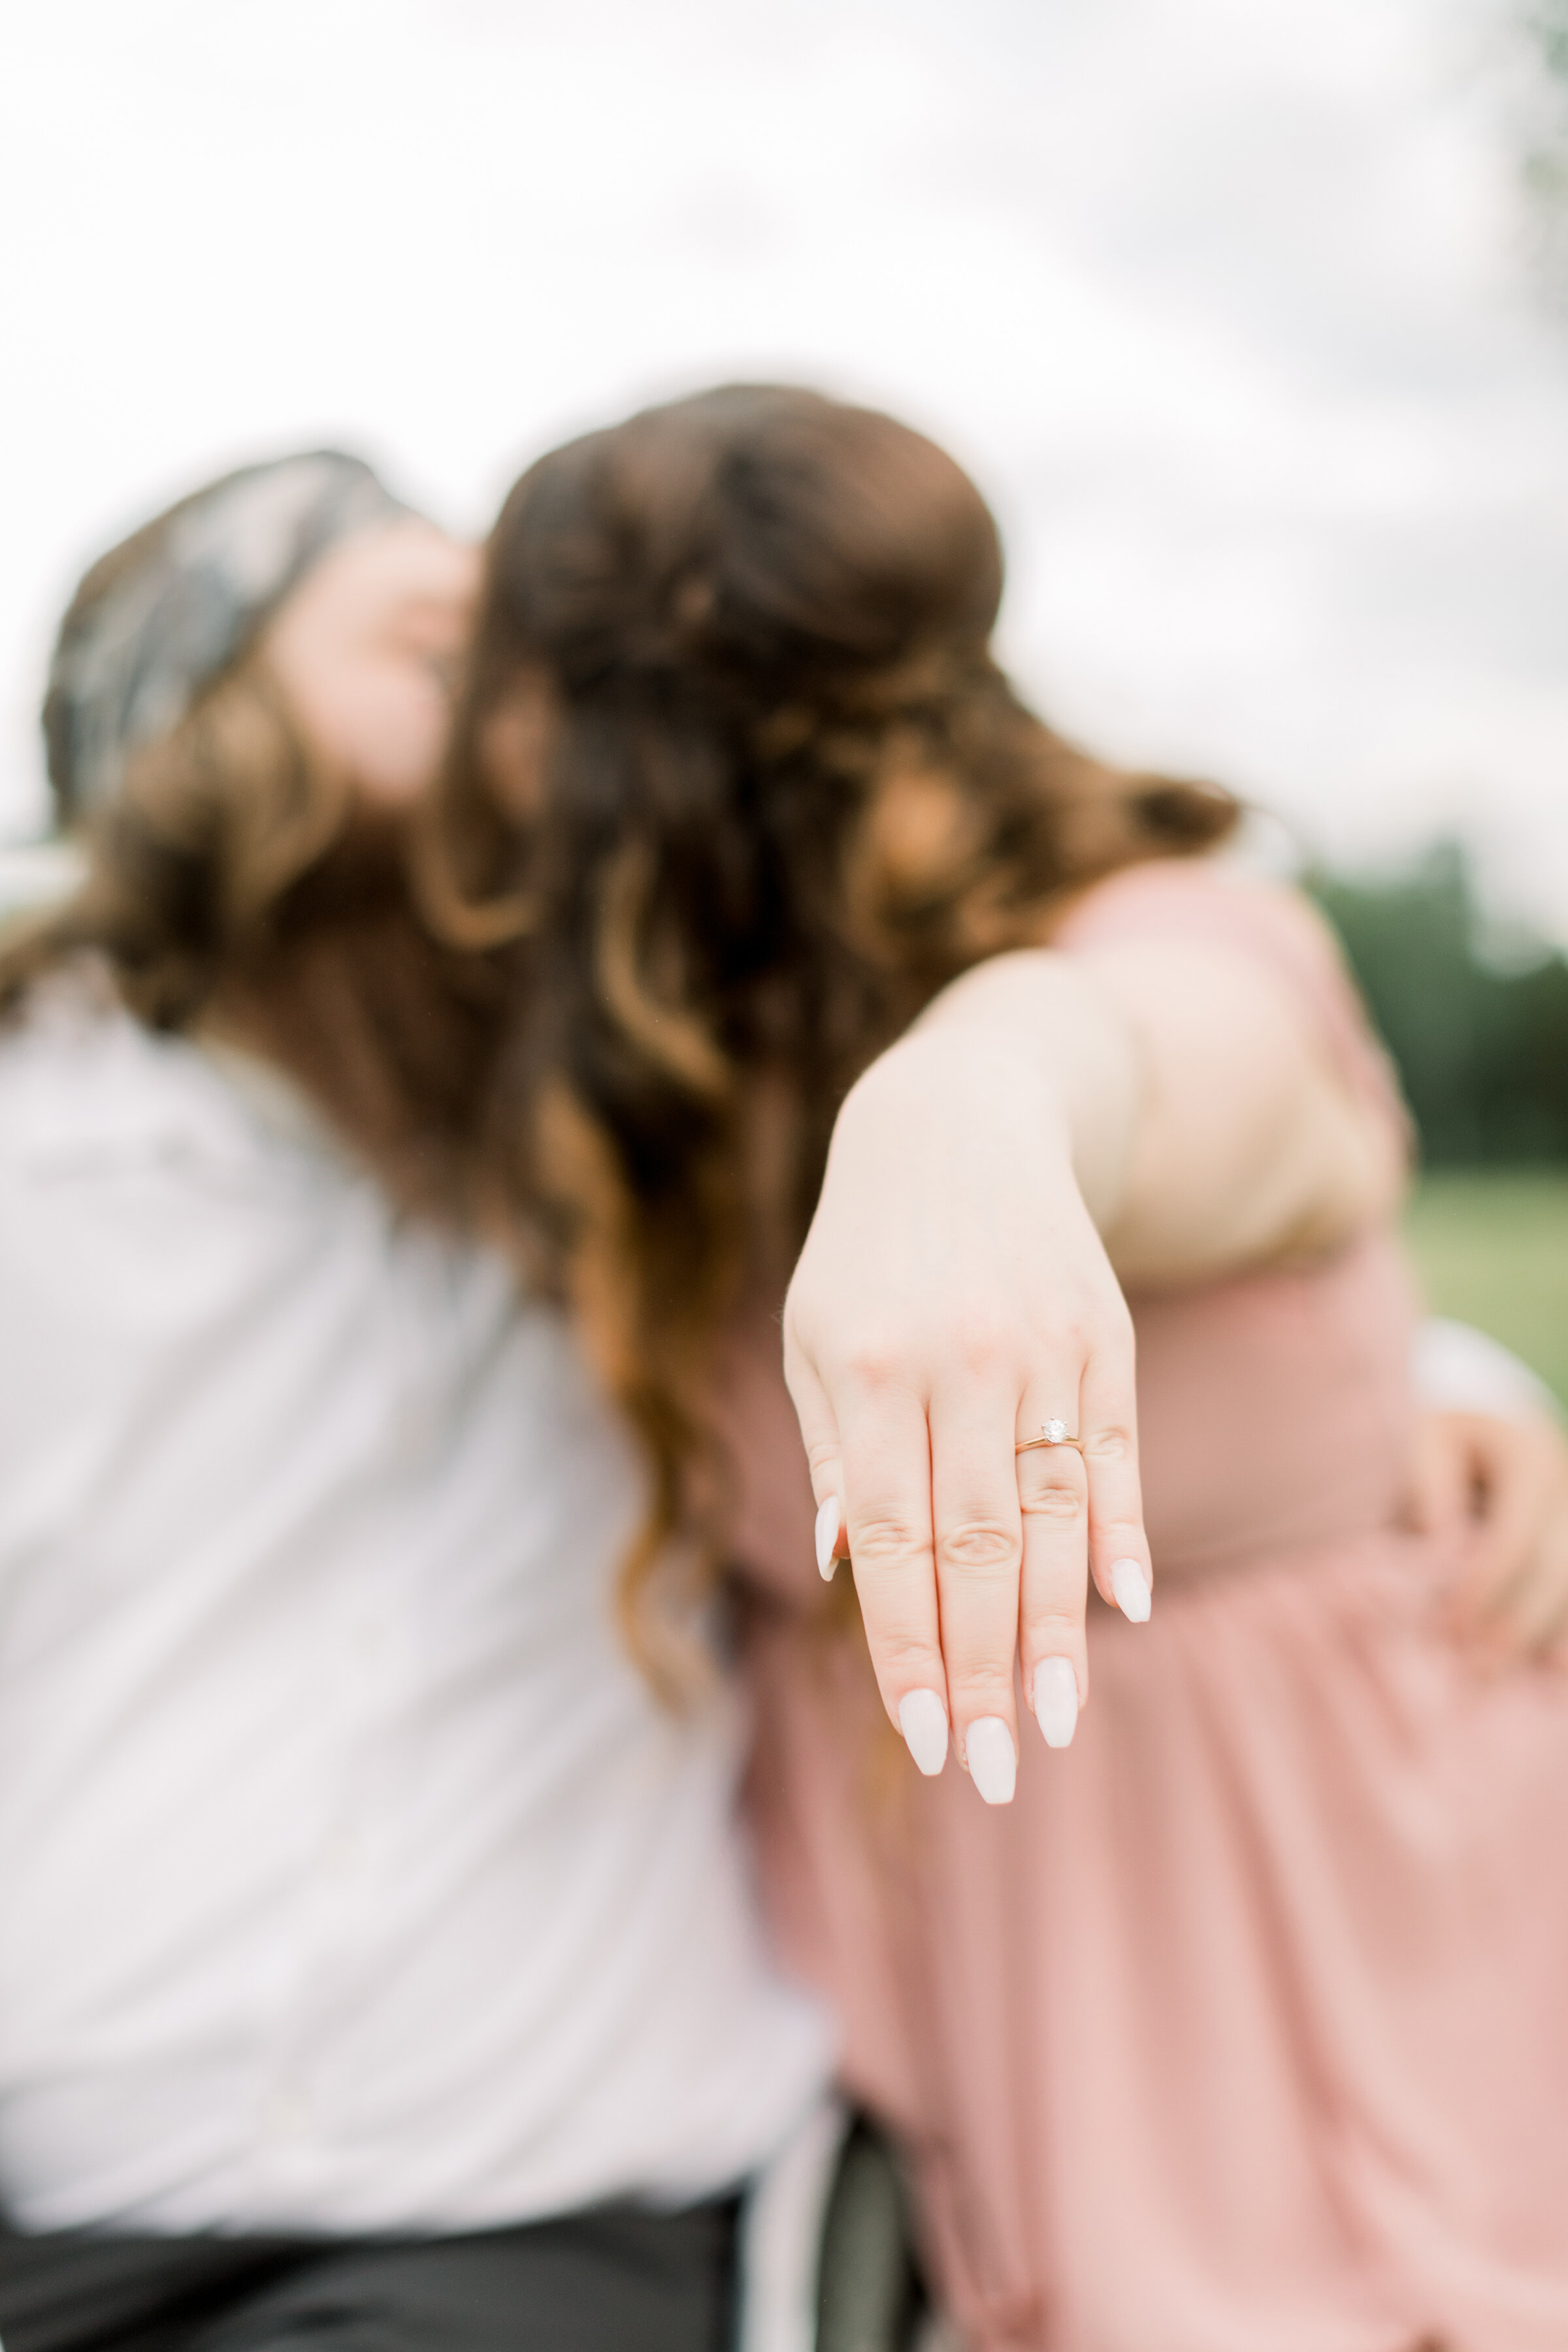  A bride shows off her stunning and simple ring while kissing her man in a beautiful outdoor engagement photo shoot by Chelsea Mason Photography. Couple goals showing off the ring pose inspiration ideas and goals client attire inspiration ideas and g